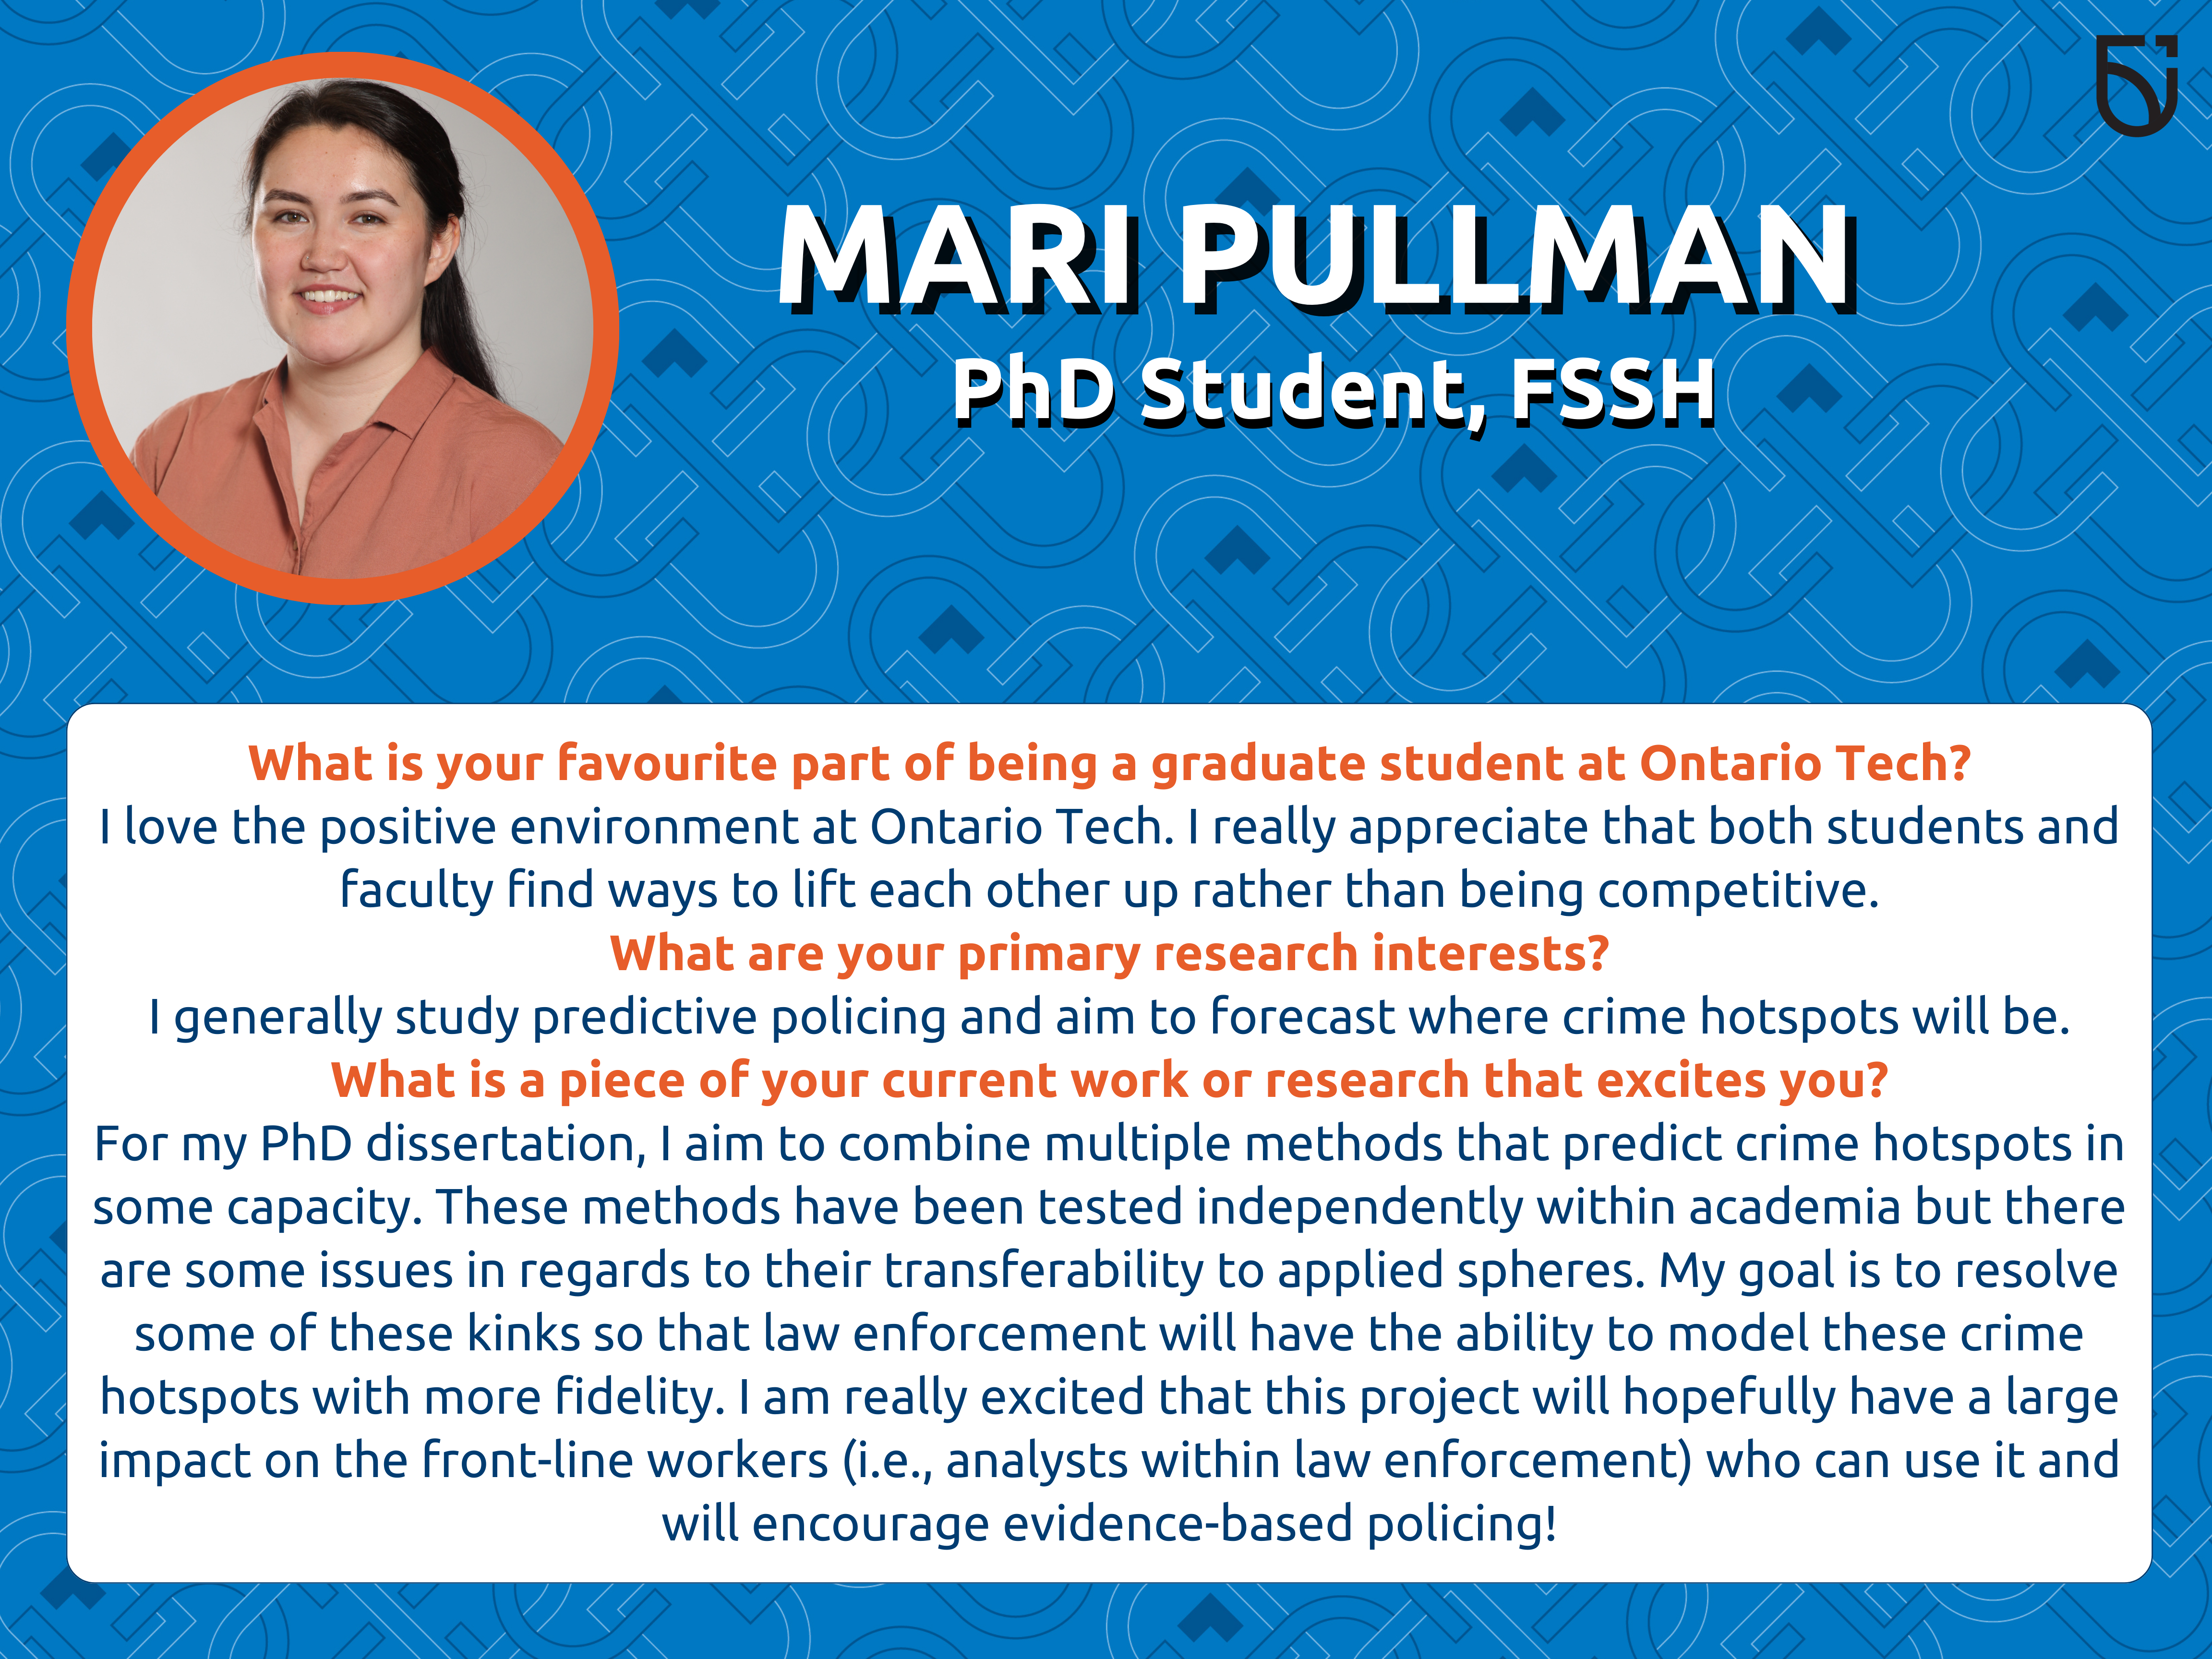 This photo is a Women’s Wednesday feature of Mari Pullman, a PhD student in the Faculty of Social Science and Humanities